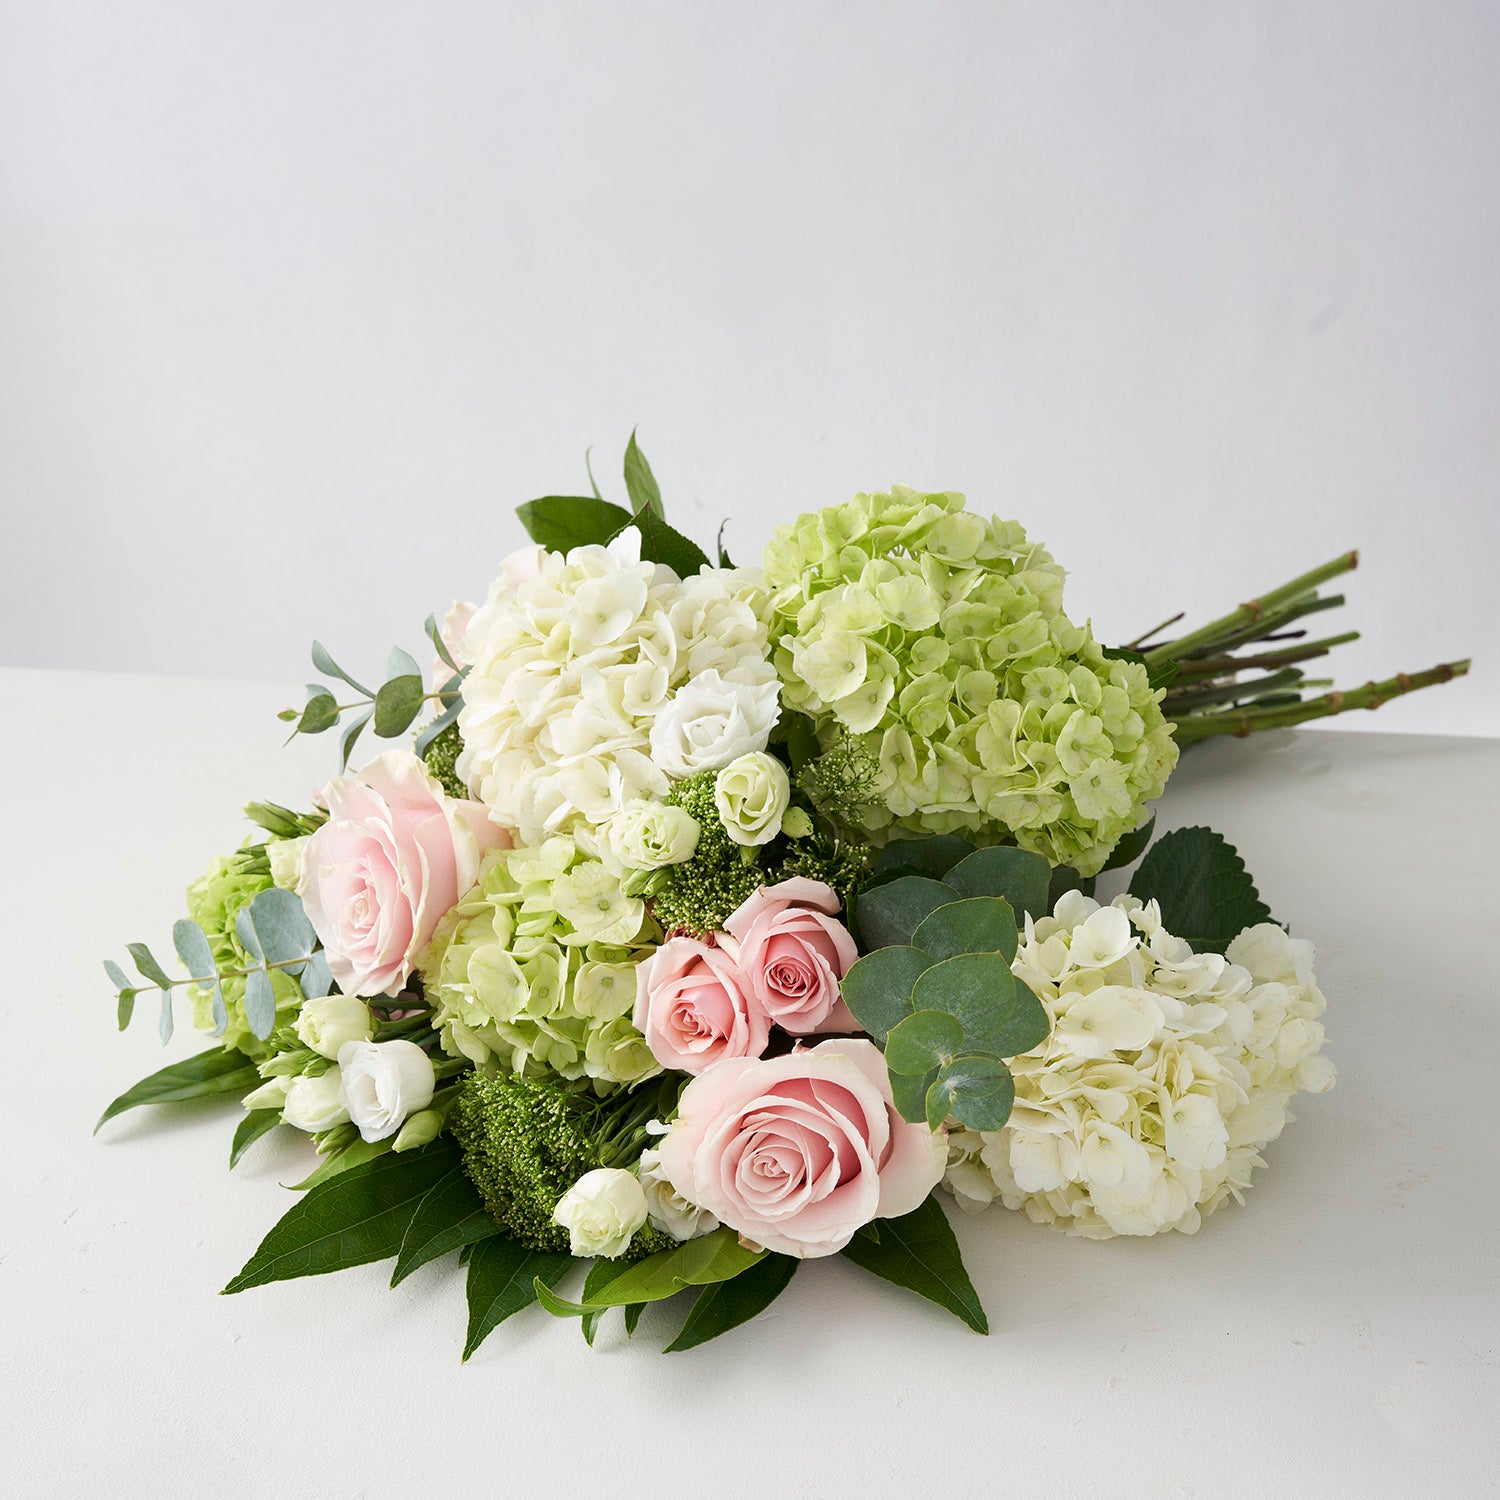 Bouquet of pink roses pale green hydrangea and eucalyptus on white background.